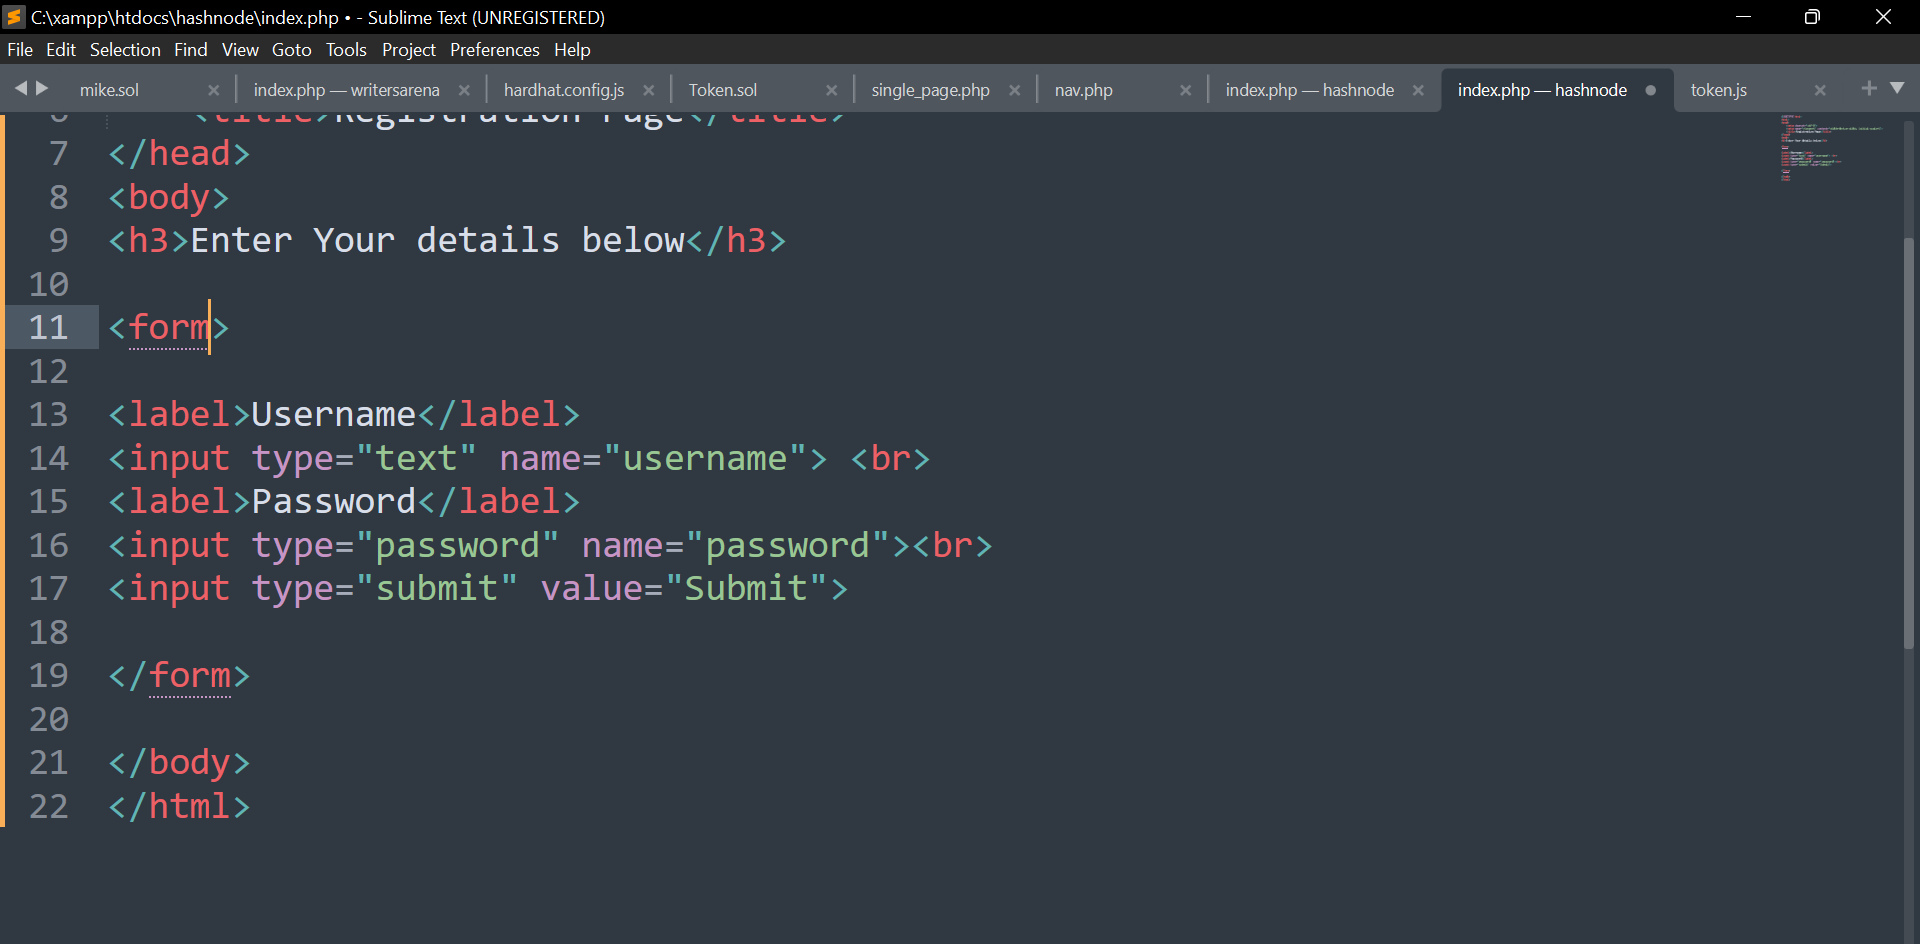 C__xampp_htdocs_hashnode_index.php  - Sublime Text (UNREGISTERED) 30-Sep-22 3_04_30 PM.png